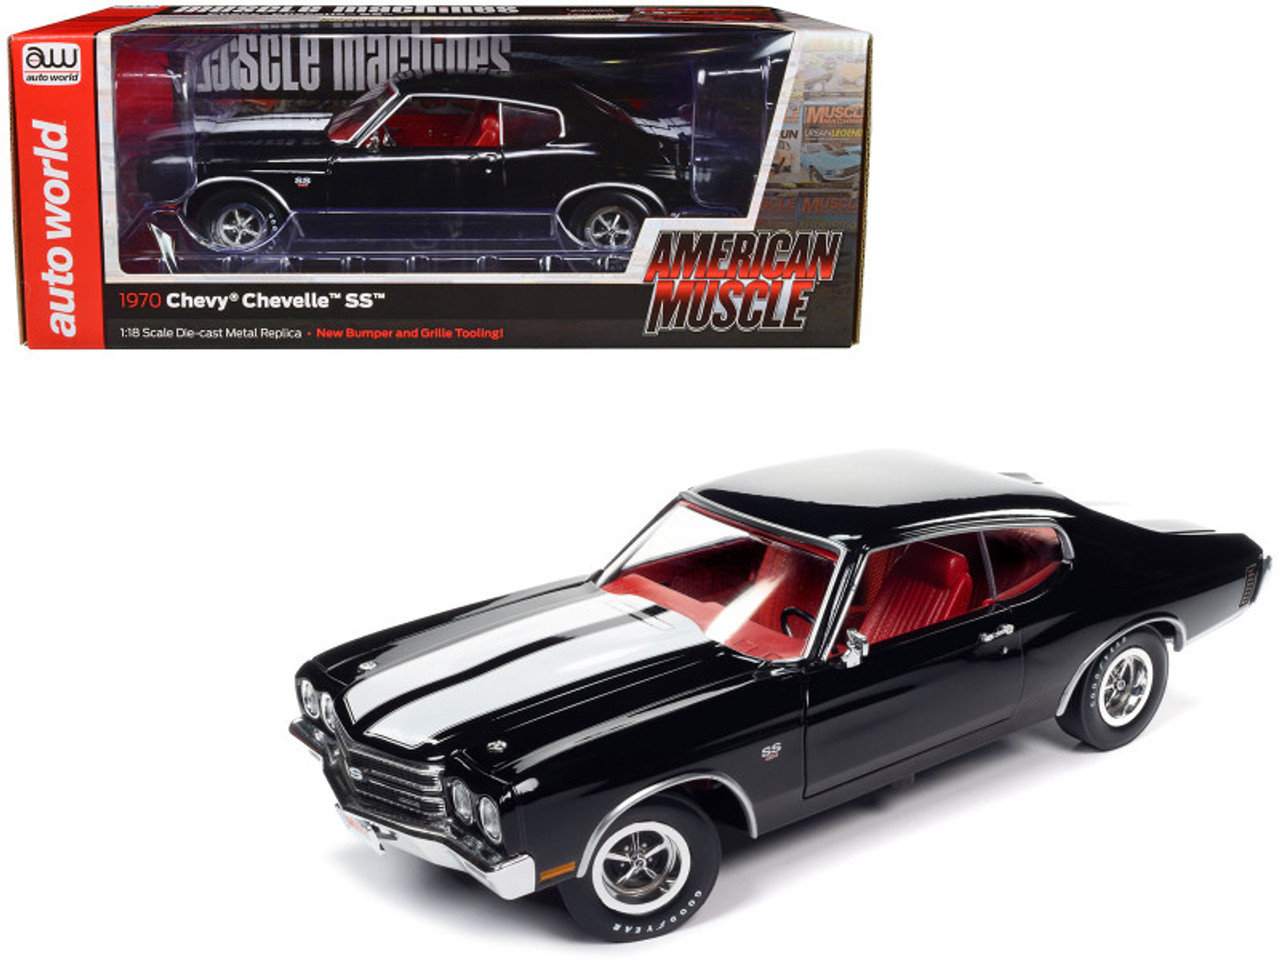 1970 Chevrolet Chevelle SS Tuxedo Black with White Stripes and Red Interior "Hemmings Muscle Machines Magazine Cover Car" (May 2011) "American Muscle" Series 1/18 Diecast Model Car by Auto World